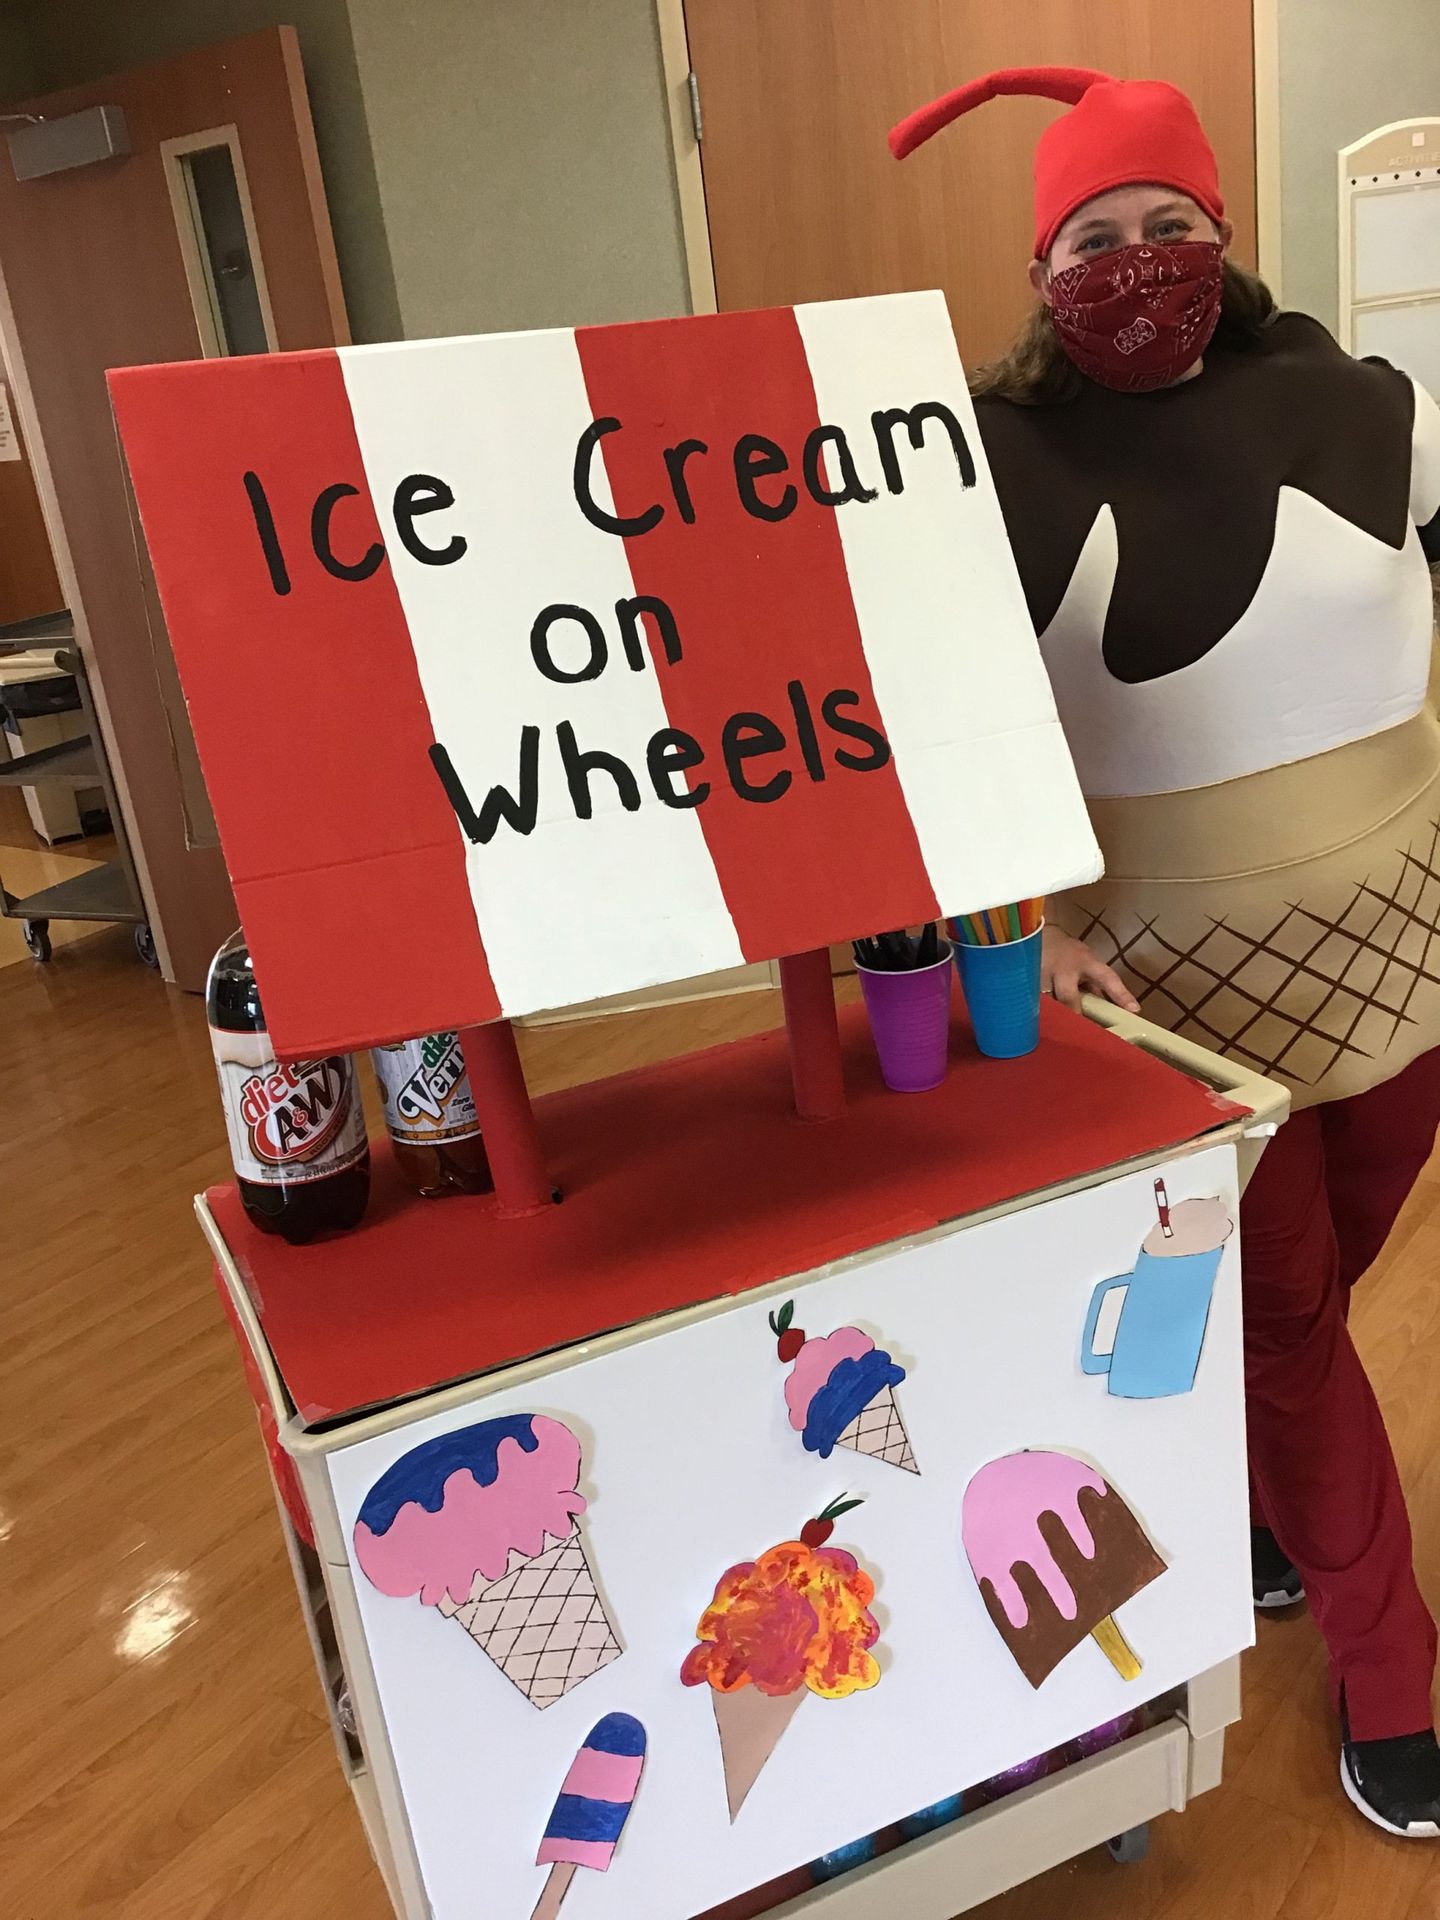 Staff member dressed up as ice cream cone handing out ice cream to Elders at Lenawee Medical Care Facility in Adrian, MI